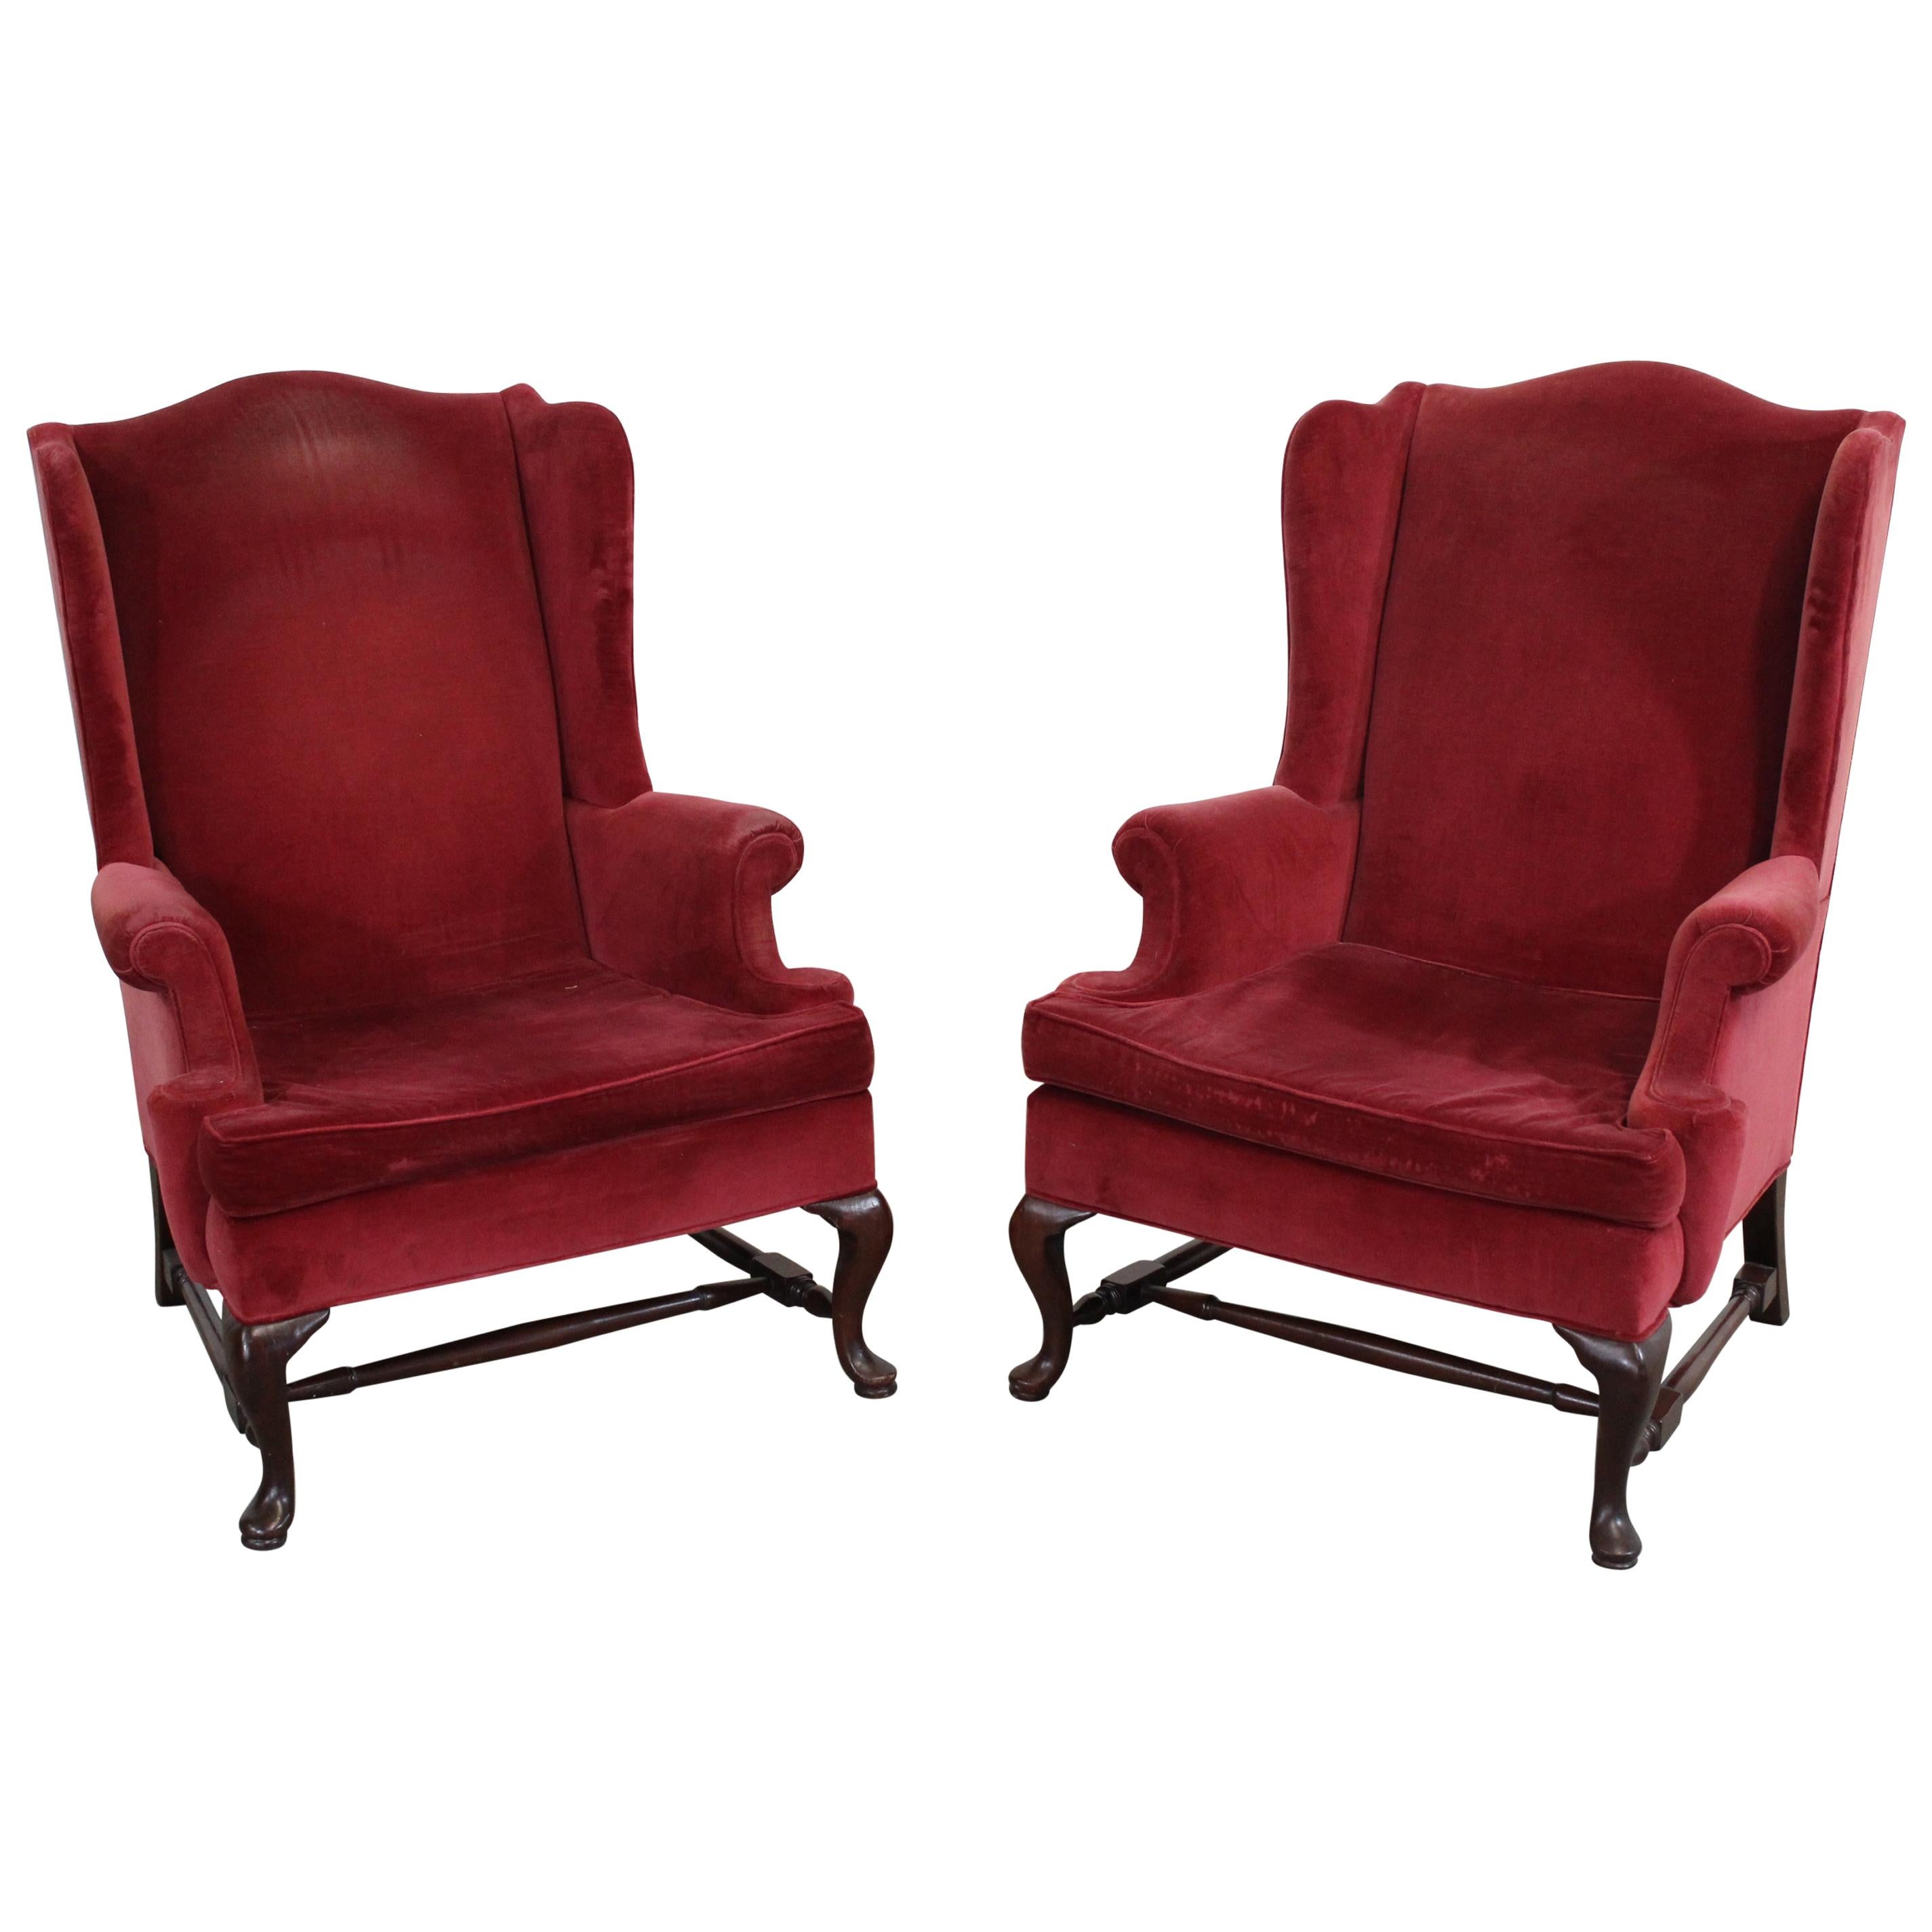 Pair of Queen Anne Fireside Wingback Chairs by Hickory Chair Co